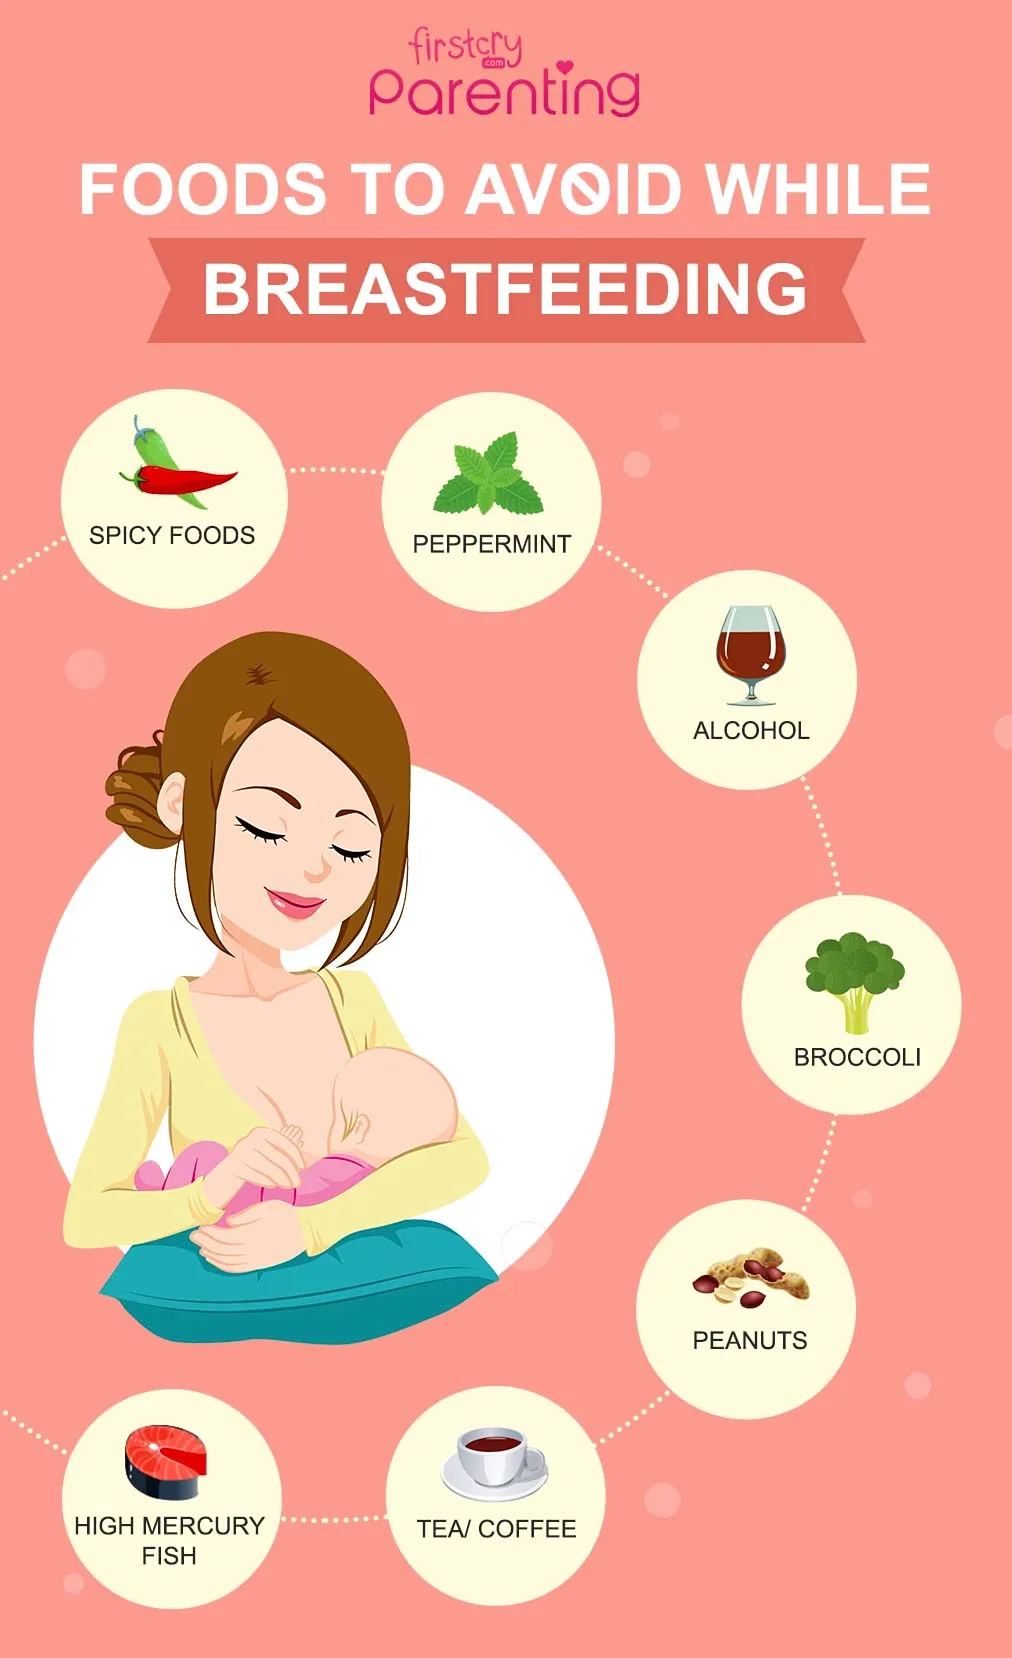 https://cdn.cdnparenting.com/articles/2019/03/16181947/Foods-To-Avoid-Eating-While-Breastfeeding.webp